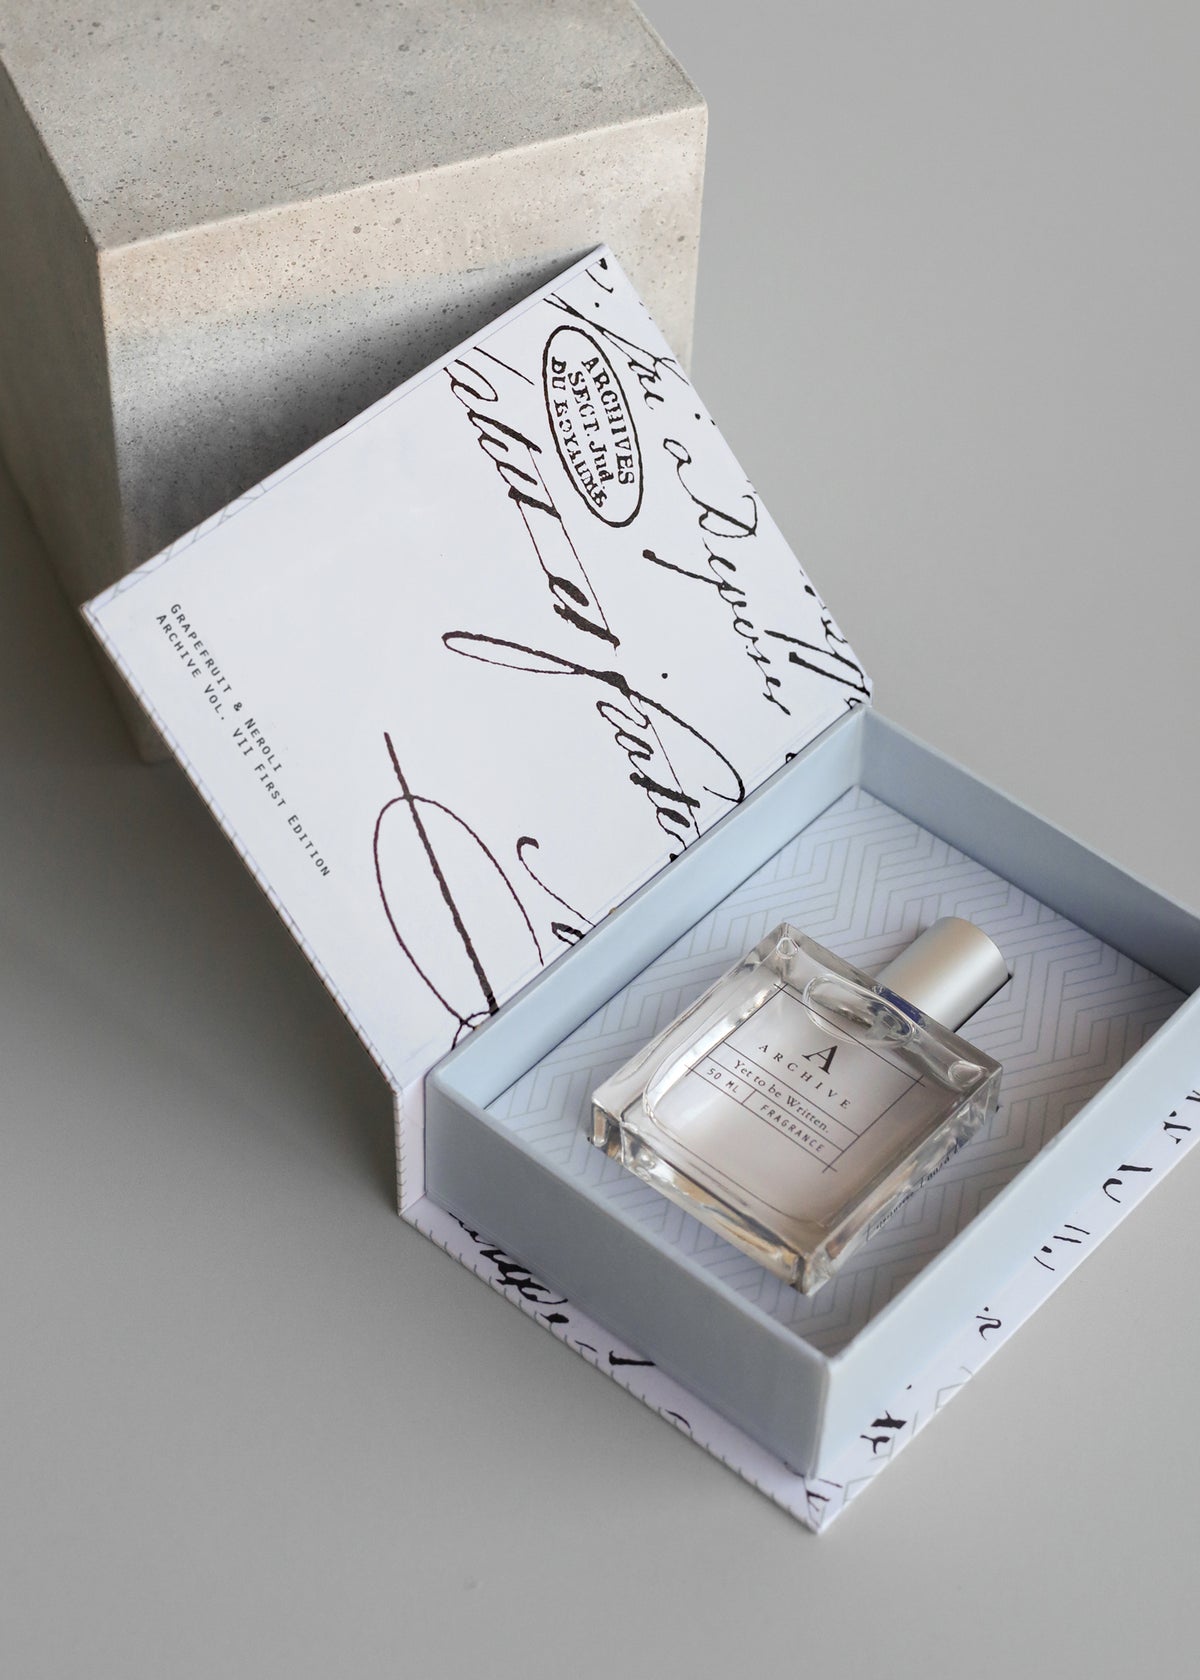 A glass perfume bottle sits inside an open light blue keepsake box with a matching outer box nearby, all featuring elegant, cursive writing and a geometric pattern inside the box. The product is ARCHIVE by Margot Elena - Yet to be Written Fragrance.